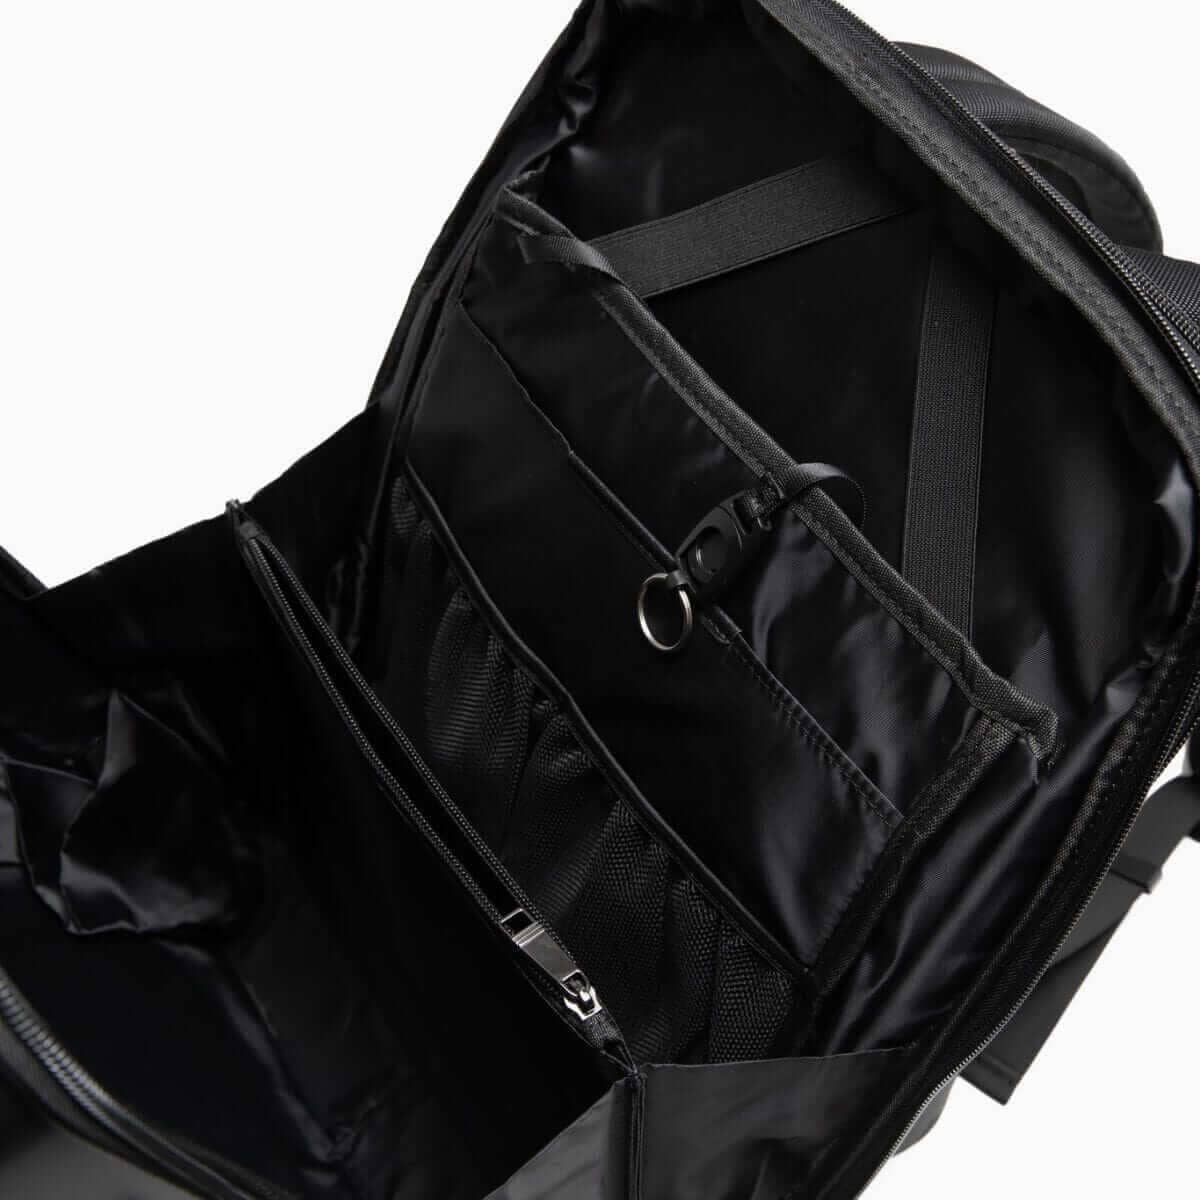 https://cyberbackpack.com/cdn/shop/products/lightweight-anti-theft-laptop-bags-for-ultimate-security-cyberbackpack-backpack-cyberbrands-151655_1200x.jpg?v=1705469397